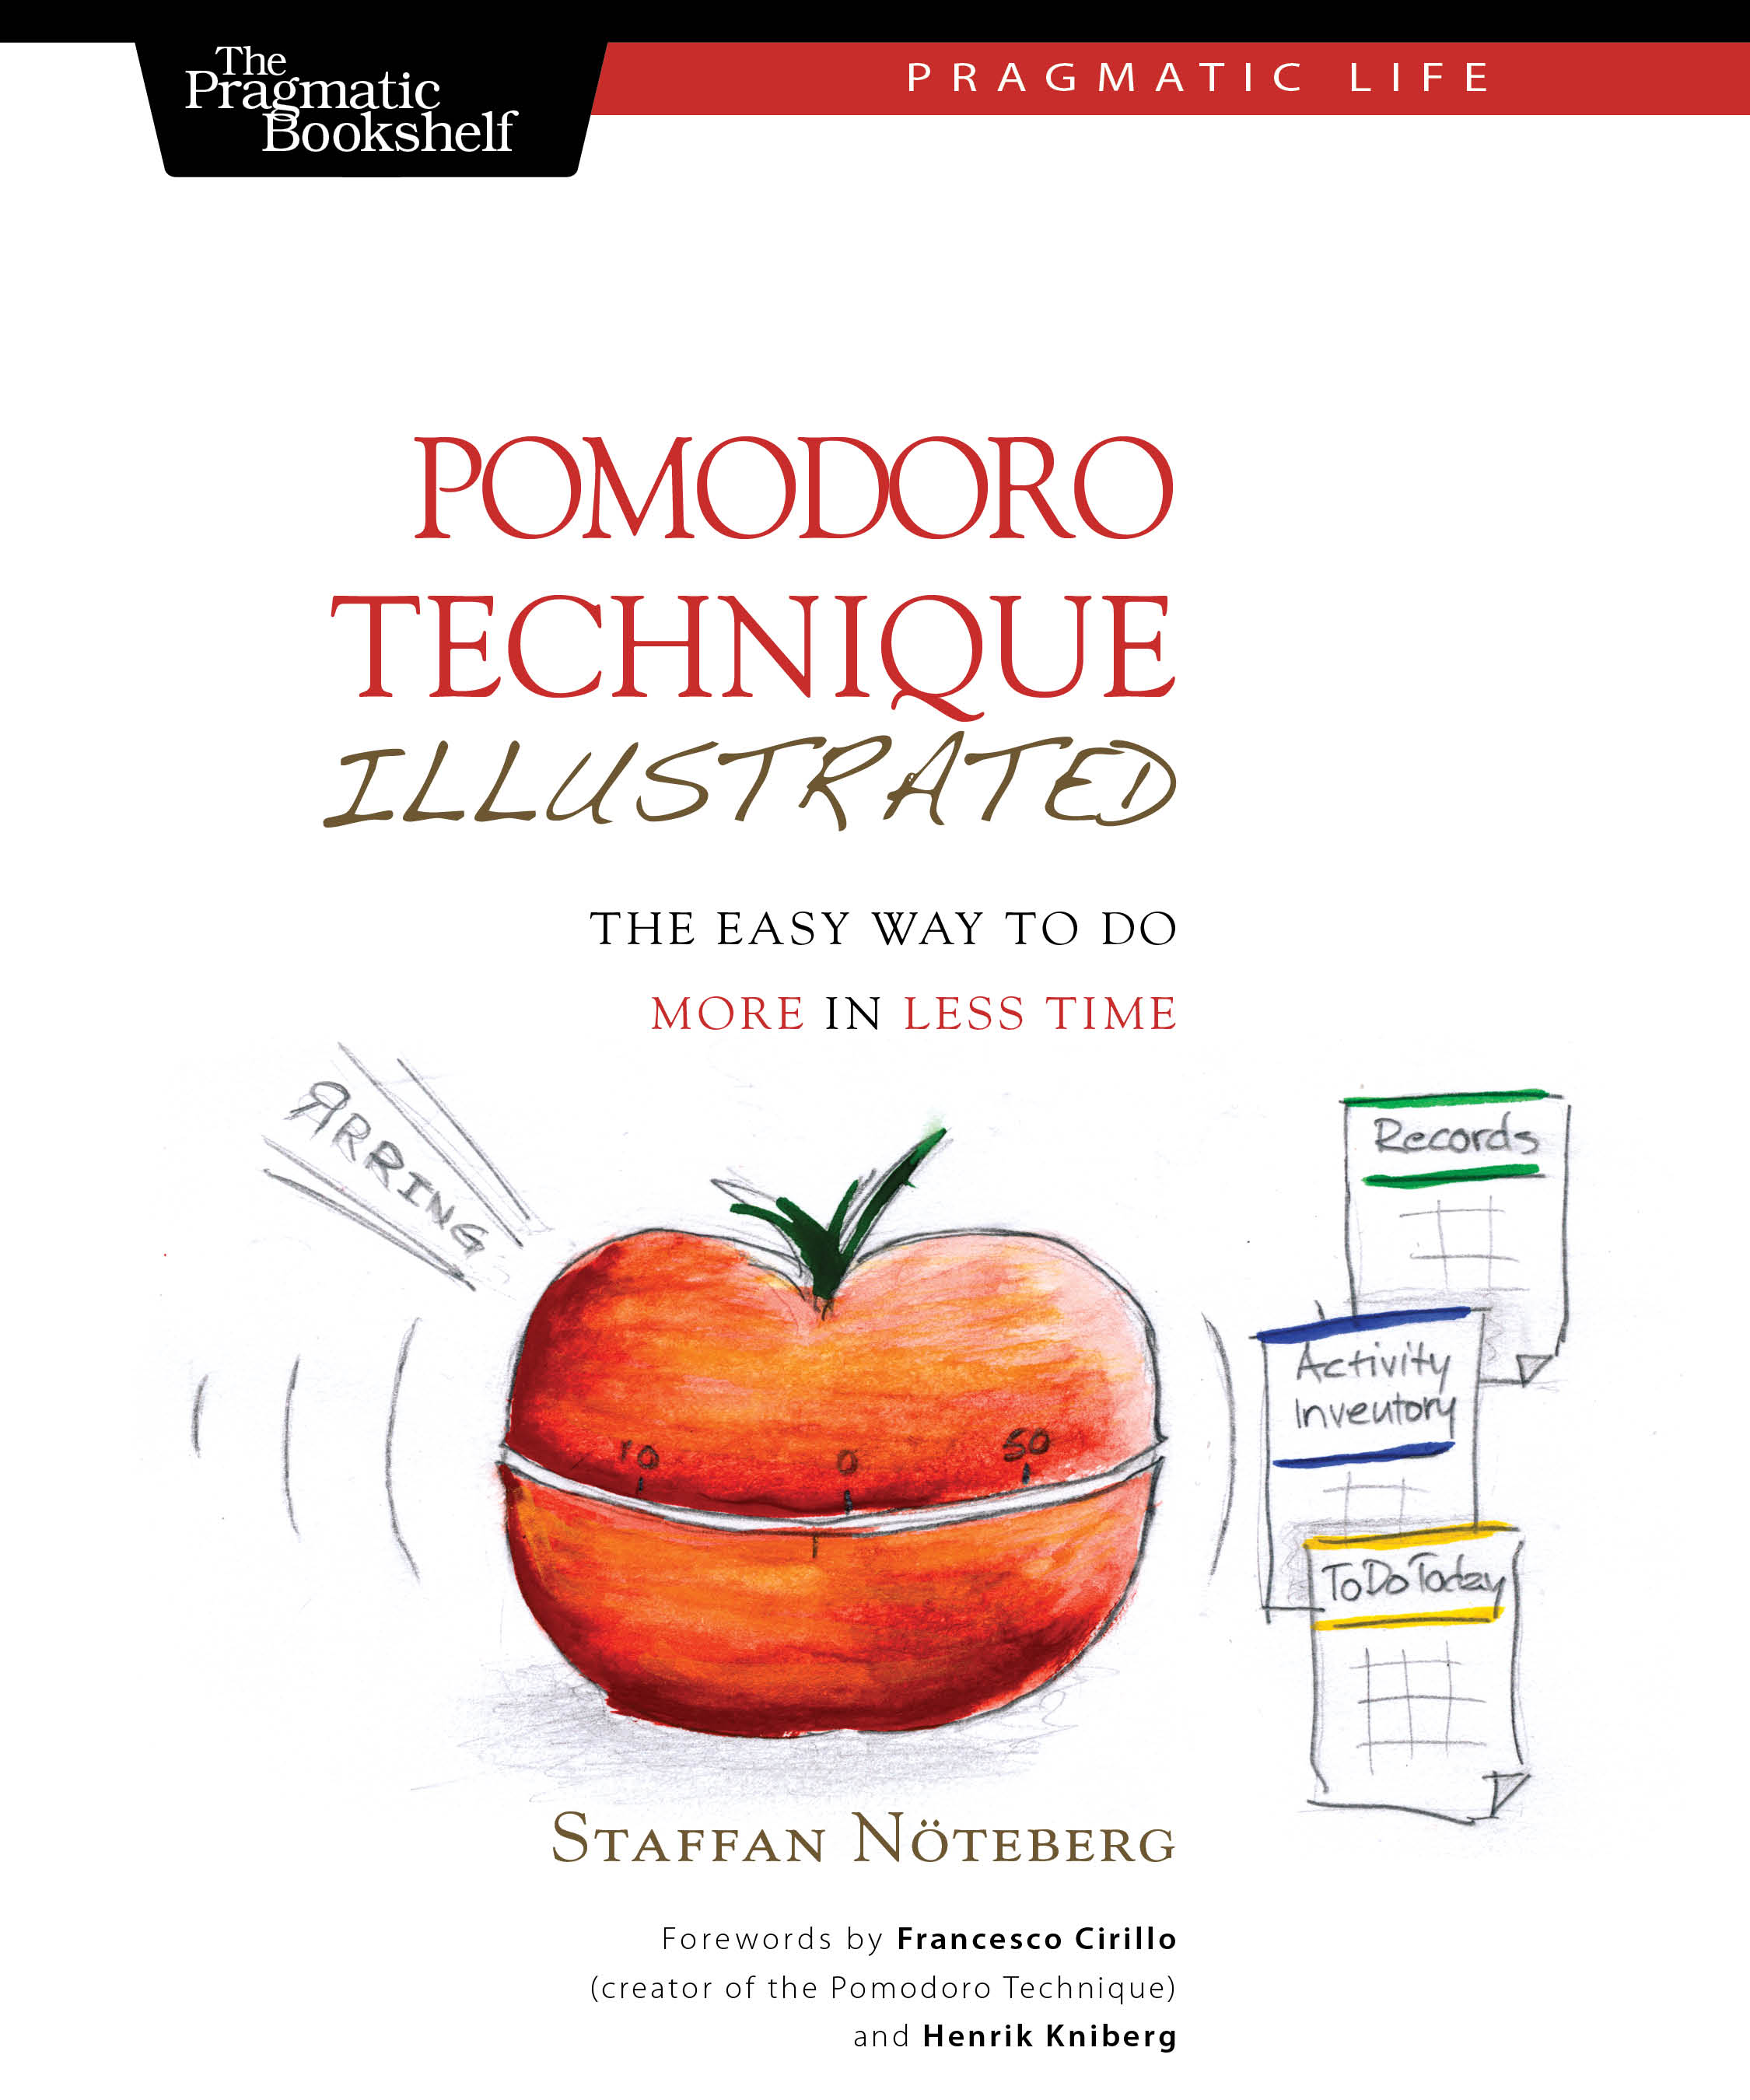 Get Started with the Pomodoro Technique